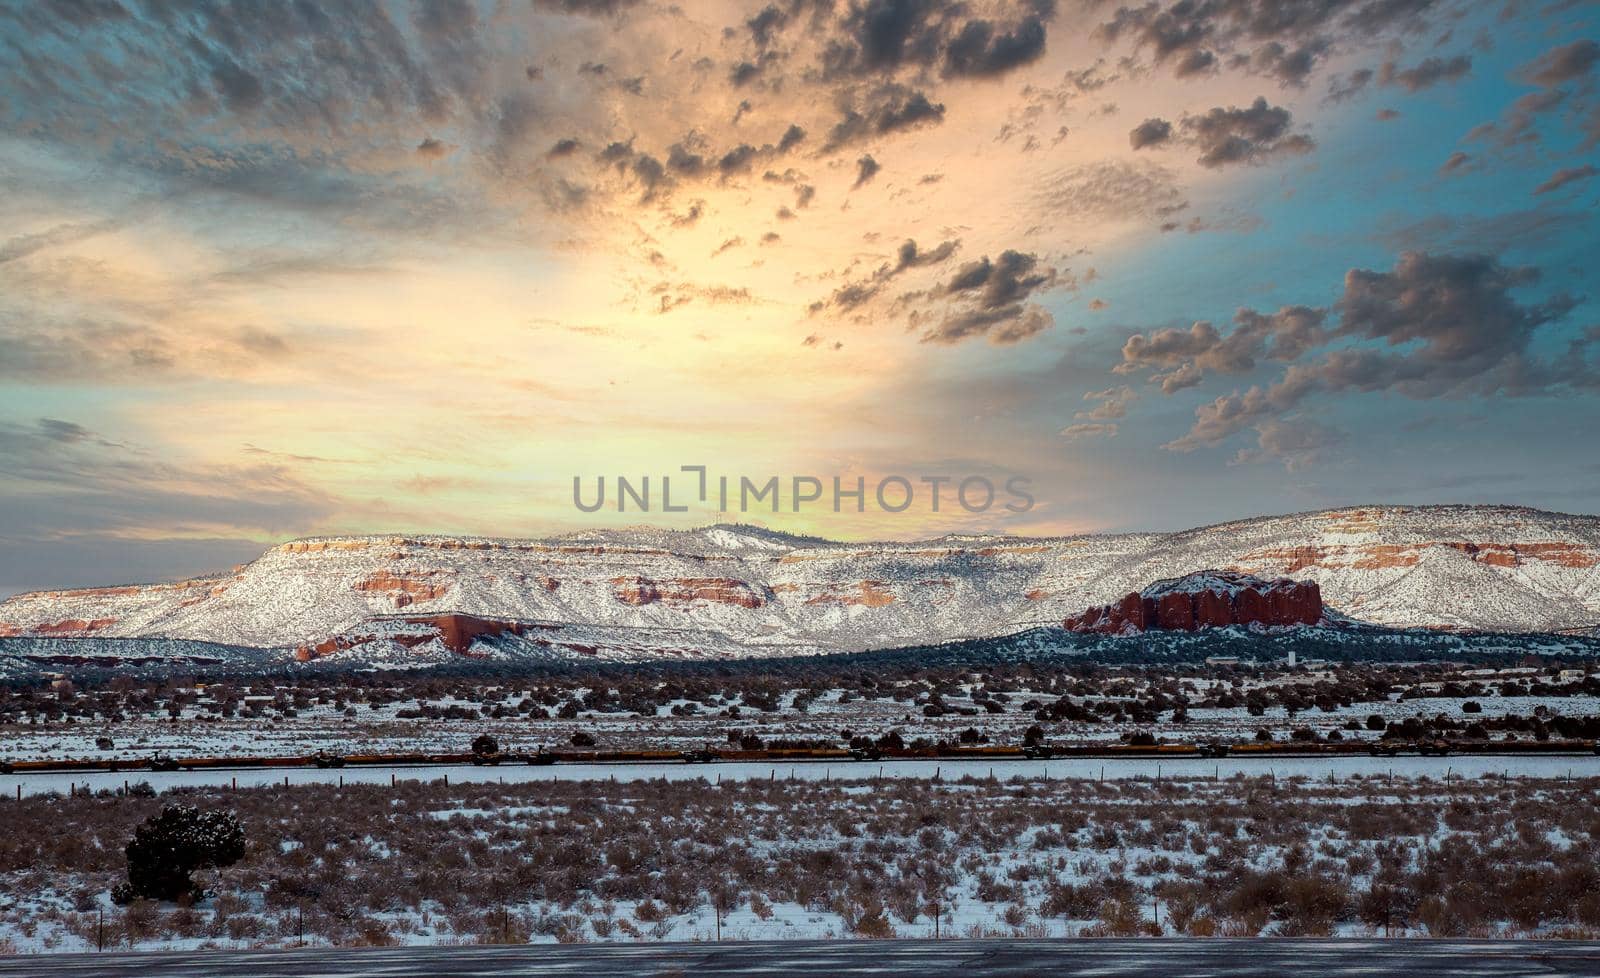 A view of snow-covered mountains, from along the I-40 highway in New Mexico US